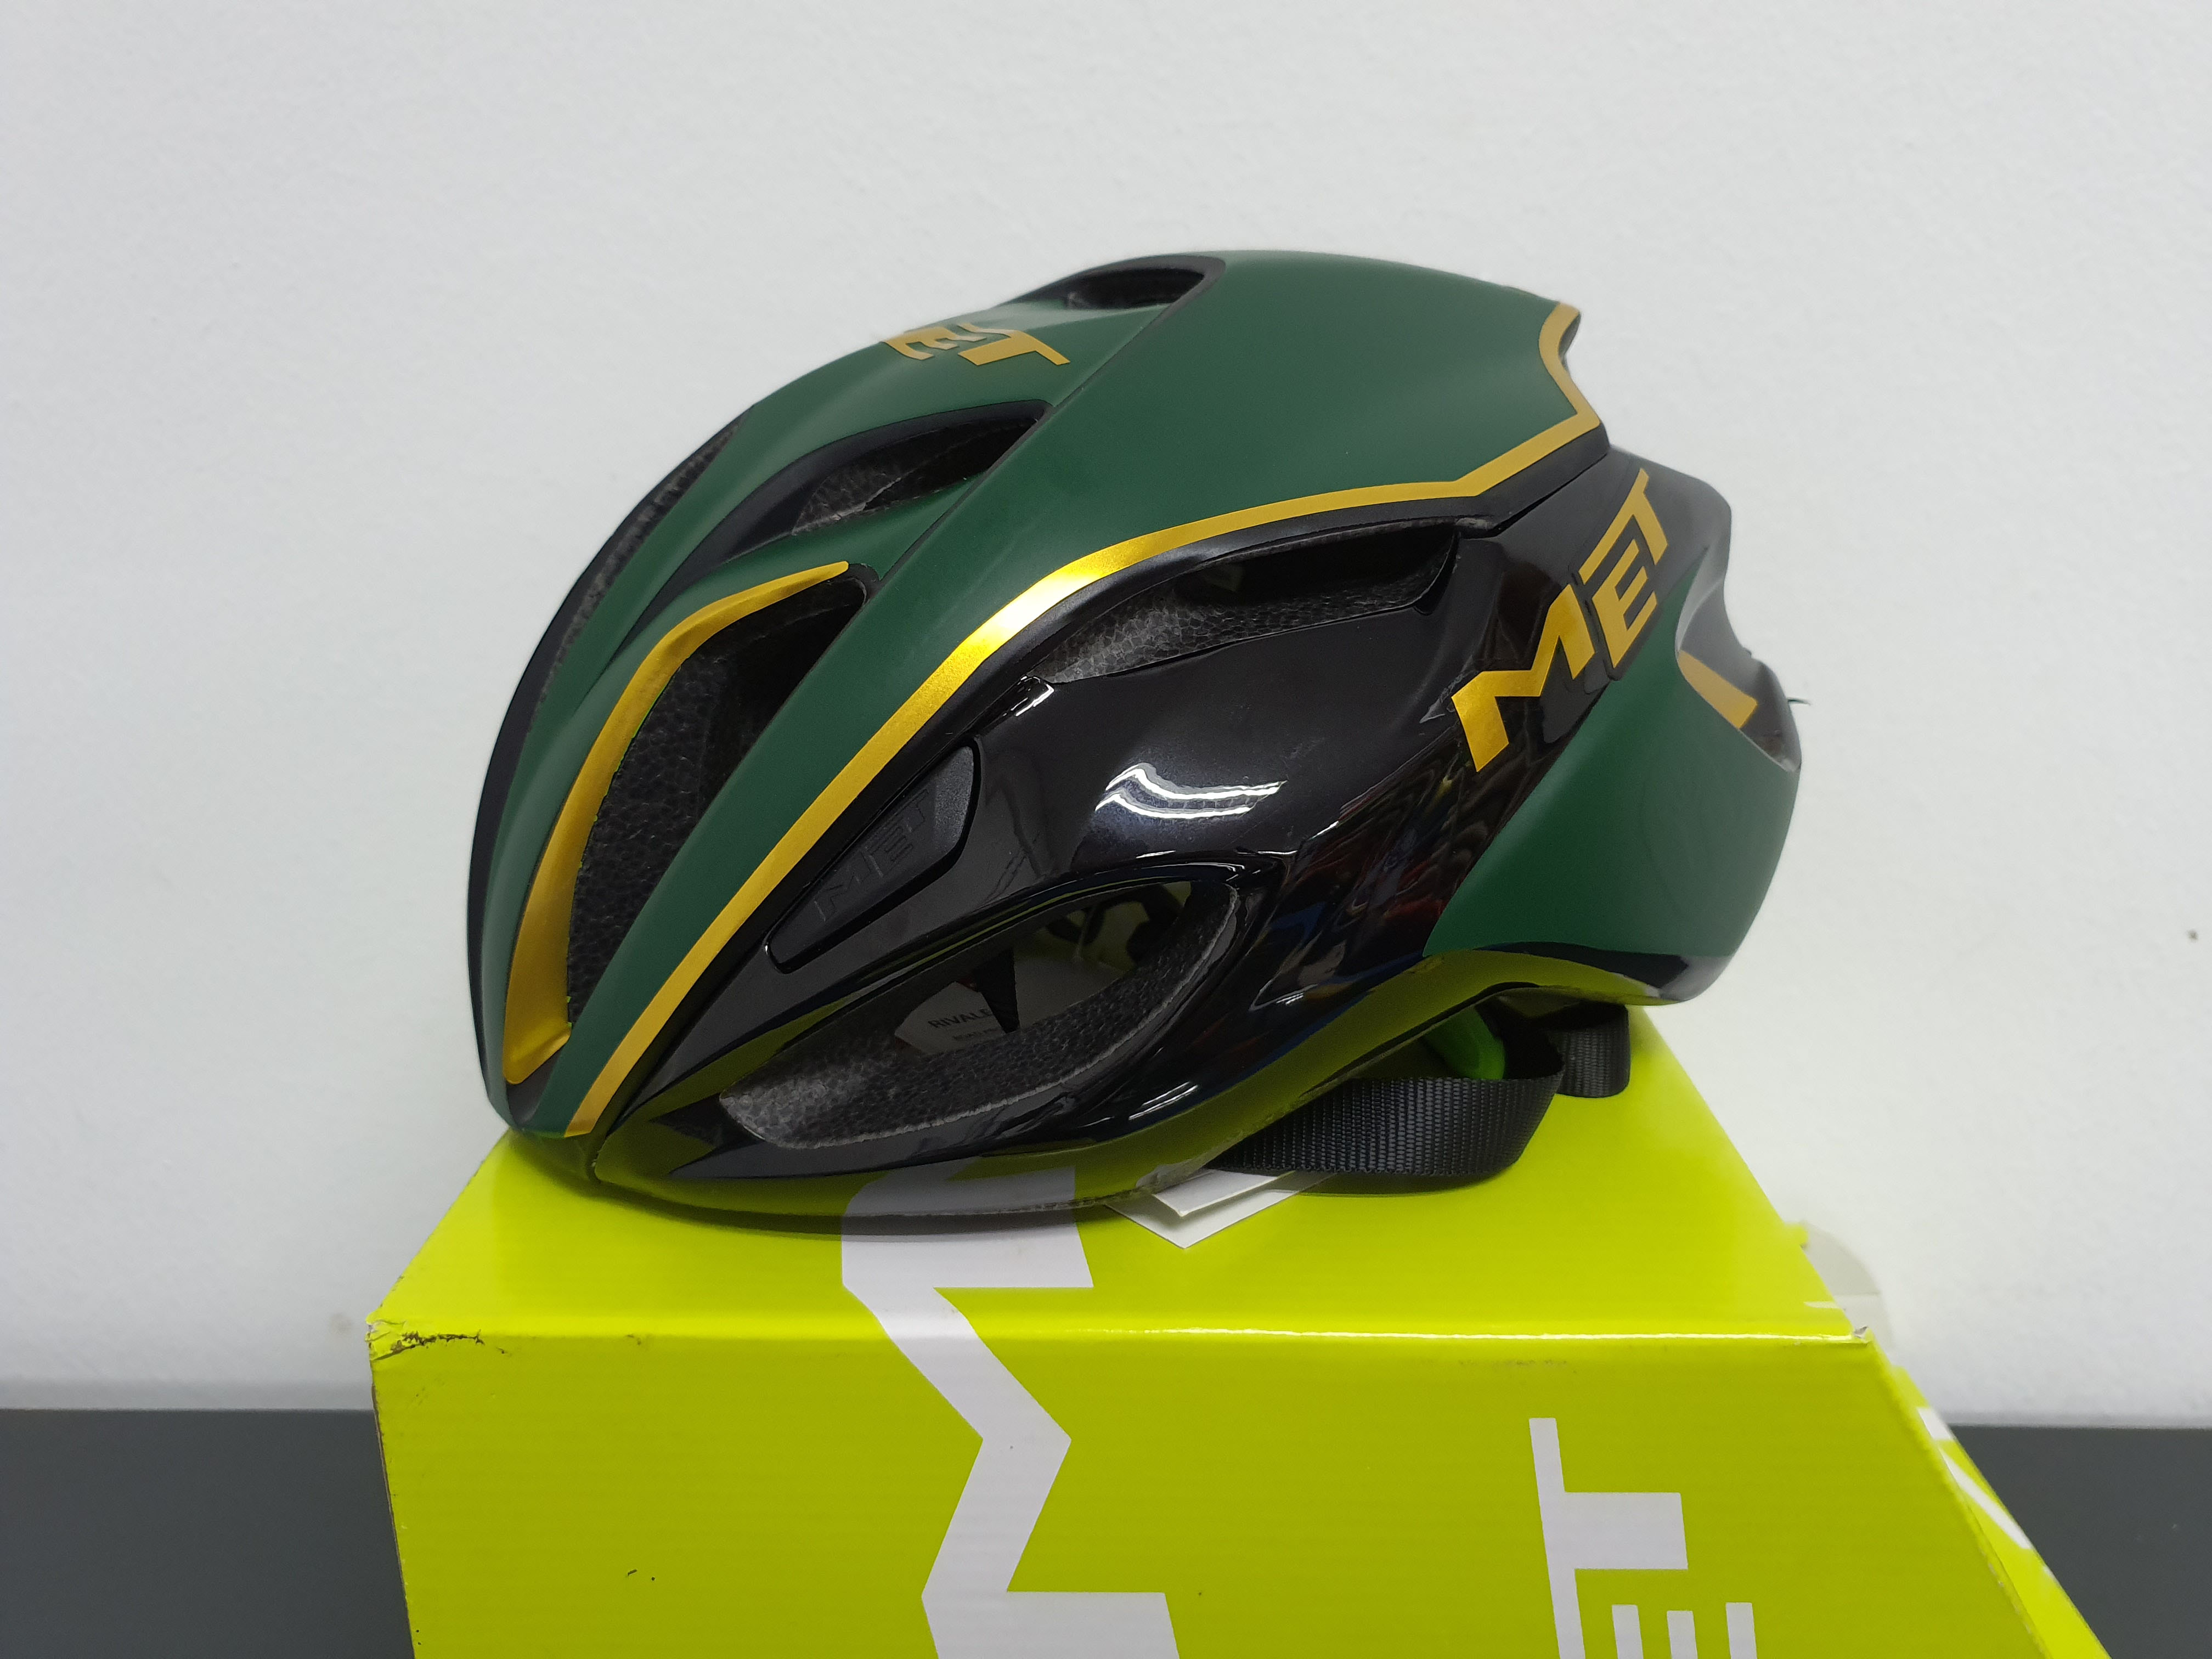 Custom Decal for MET Helmets in Gold and Green